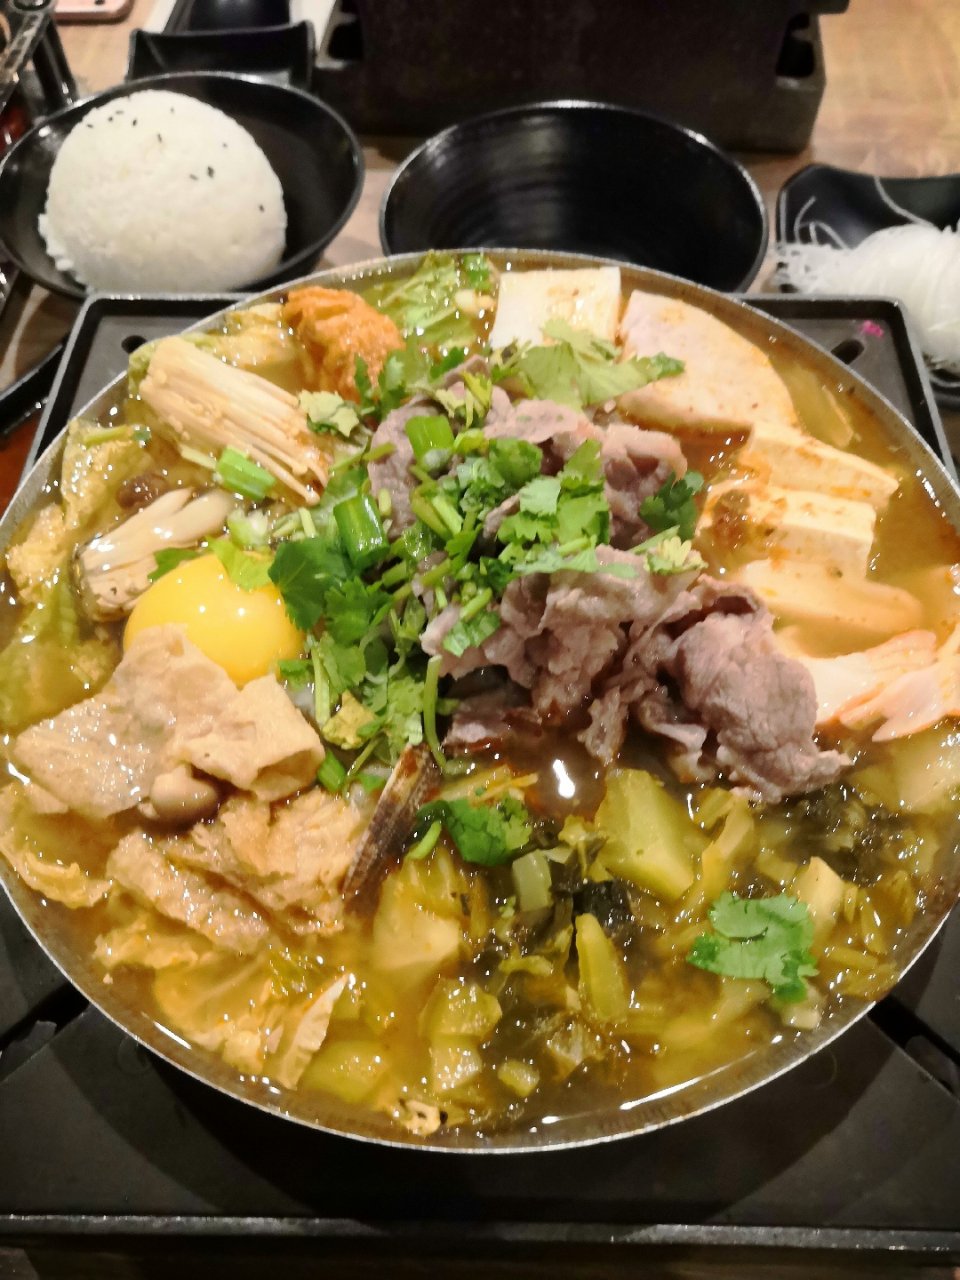 Boiling point